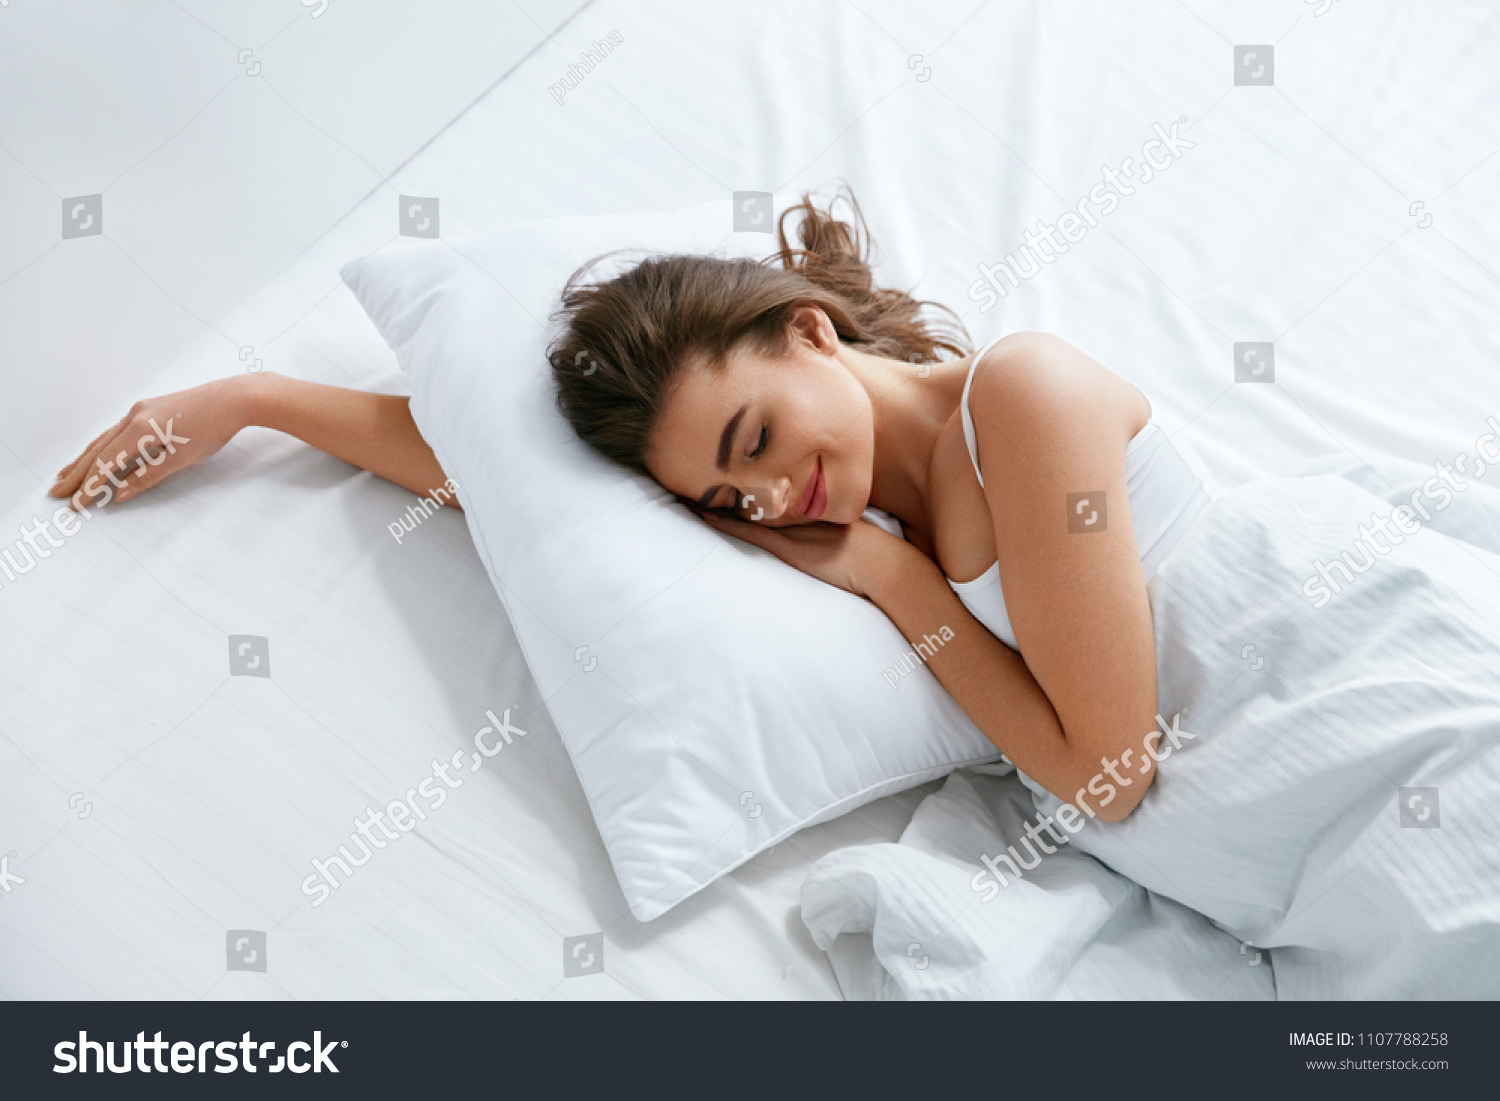 Pillows. Woman Resting On White Pillow Sleeping In Bed #1107788258